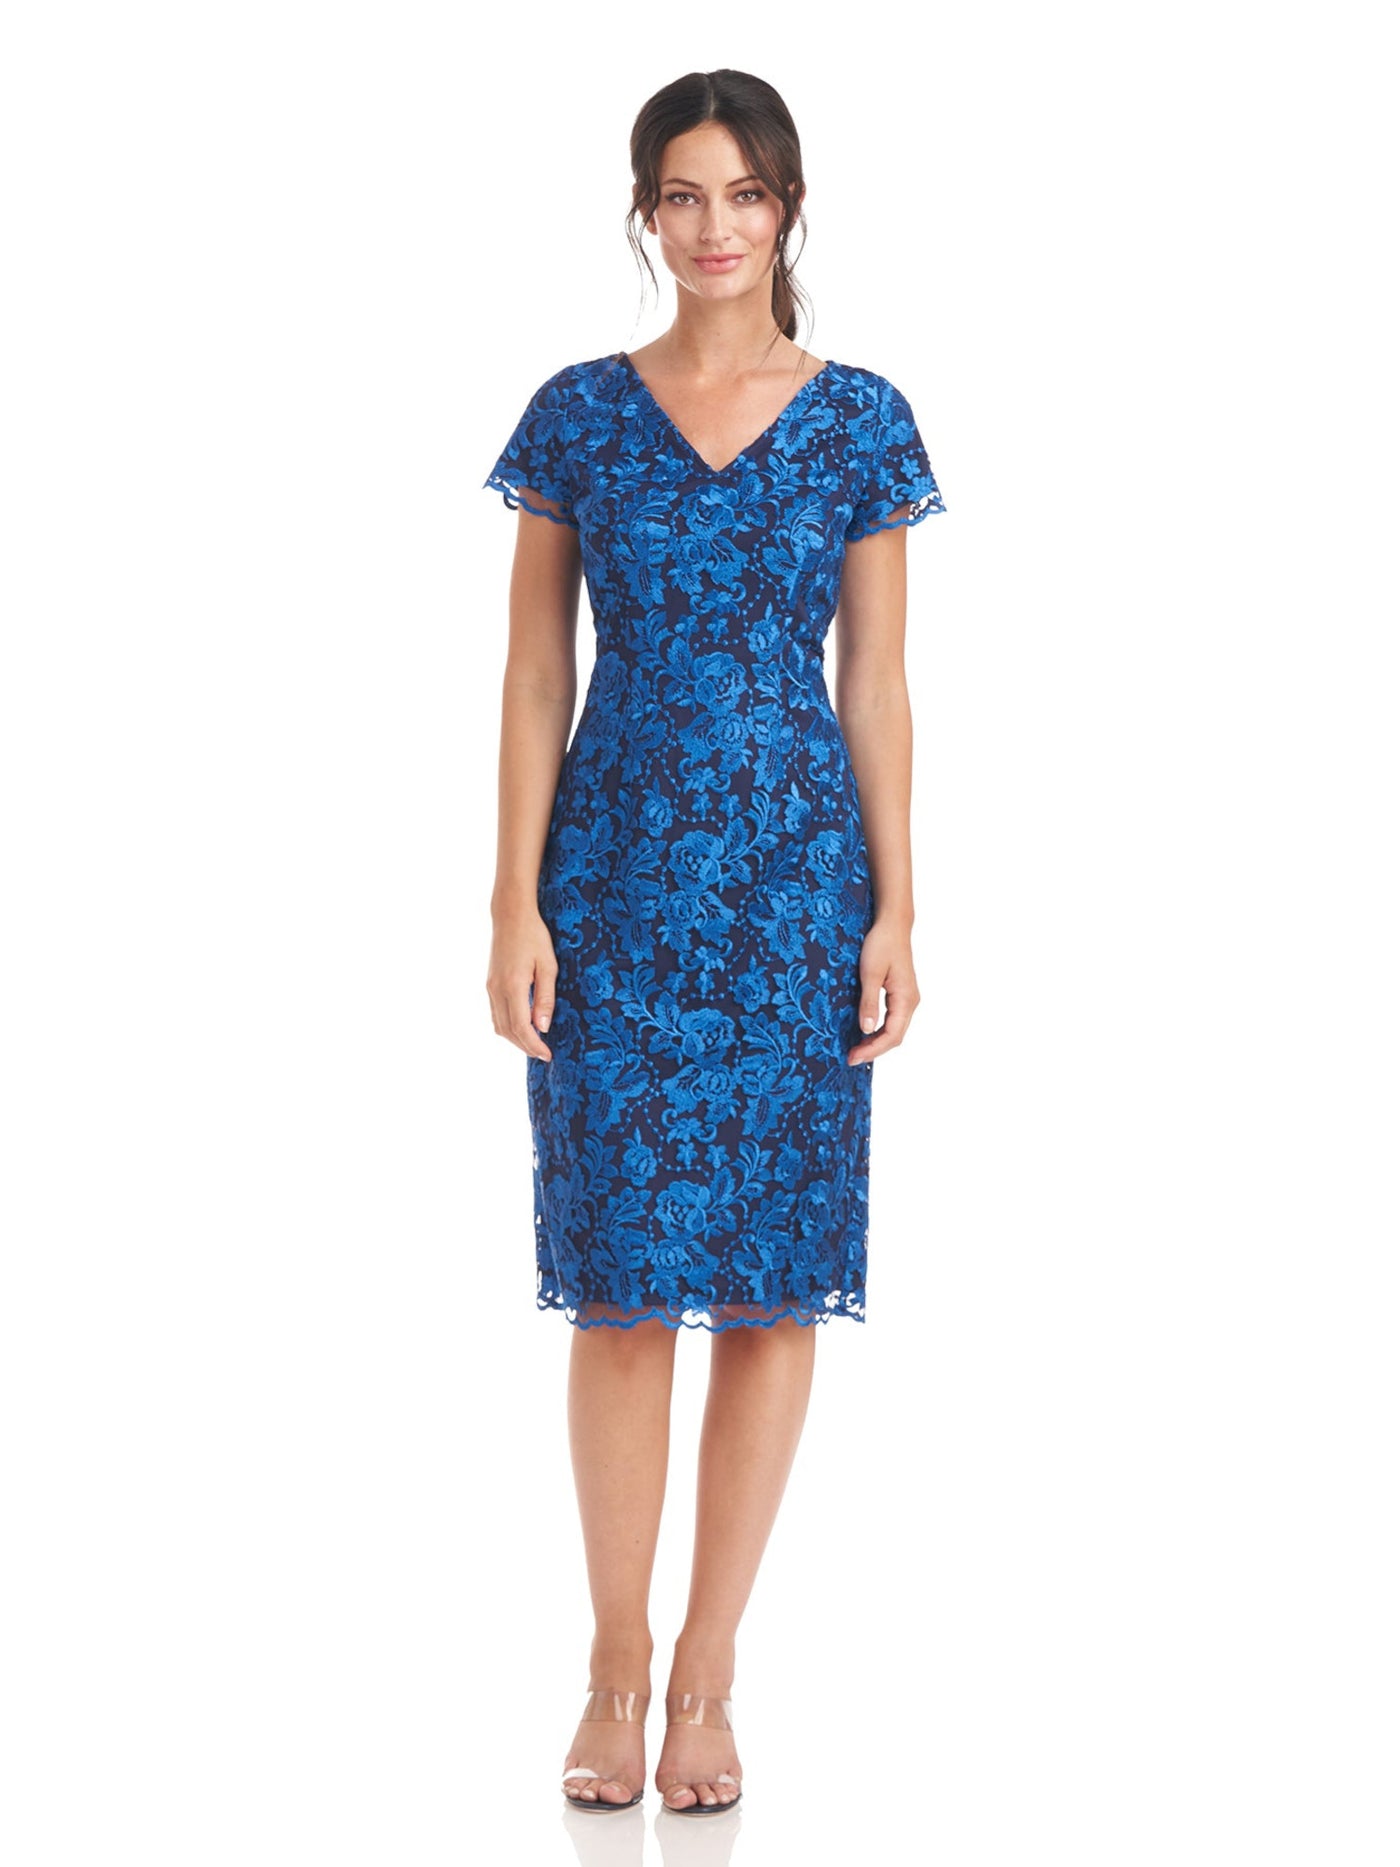 JS COLLECTIONS Womens Blue Embroidered Zippered Scalloped Mesh Floral Short Sleeve V Neck Below The Knee Party Sheath Dress 6